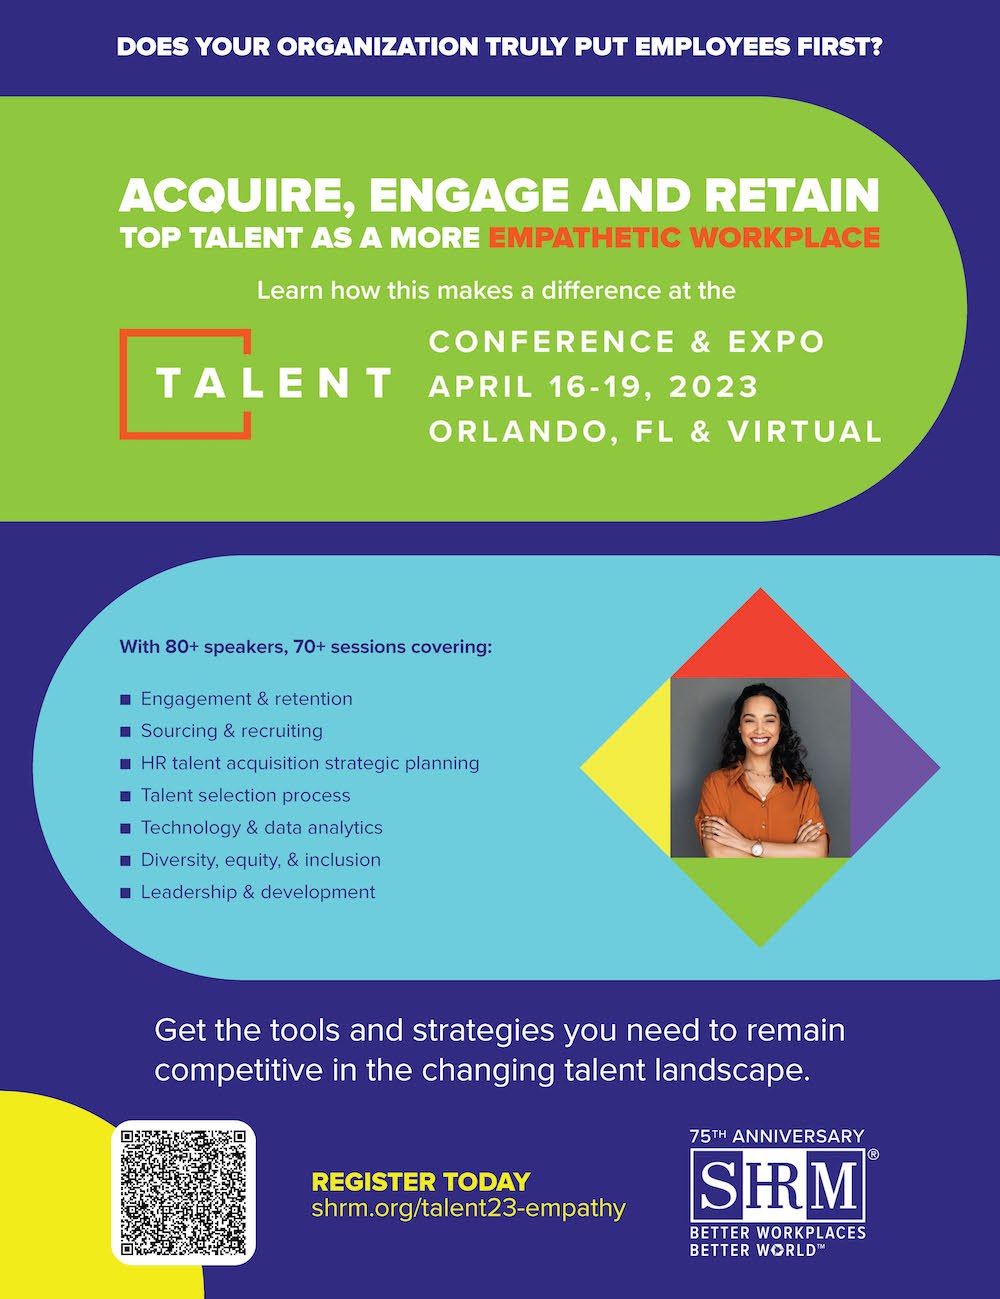 Save the Date for the 2023 SHRM Talent Conference & Expo in Orlando, FL